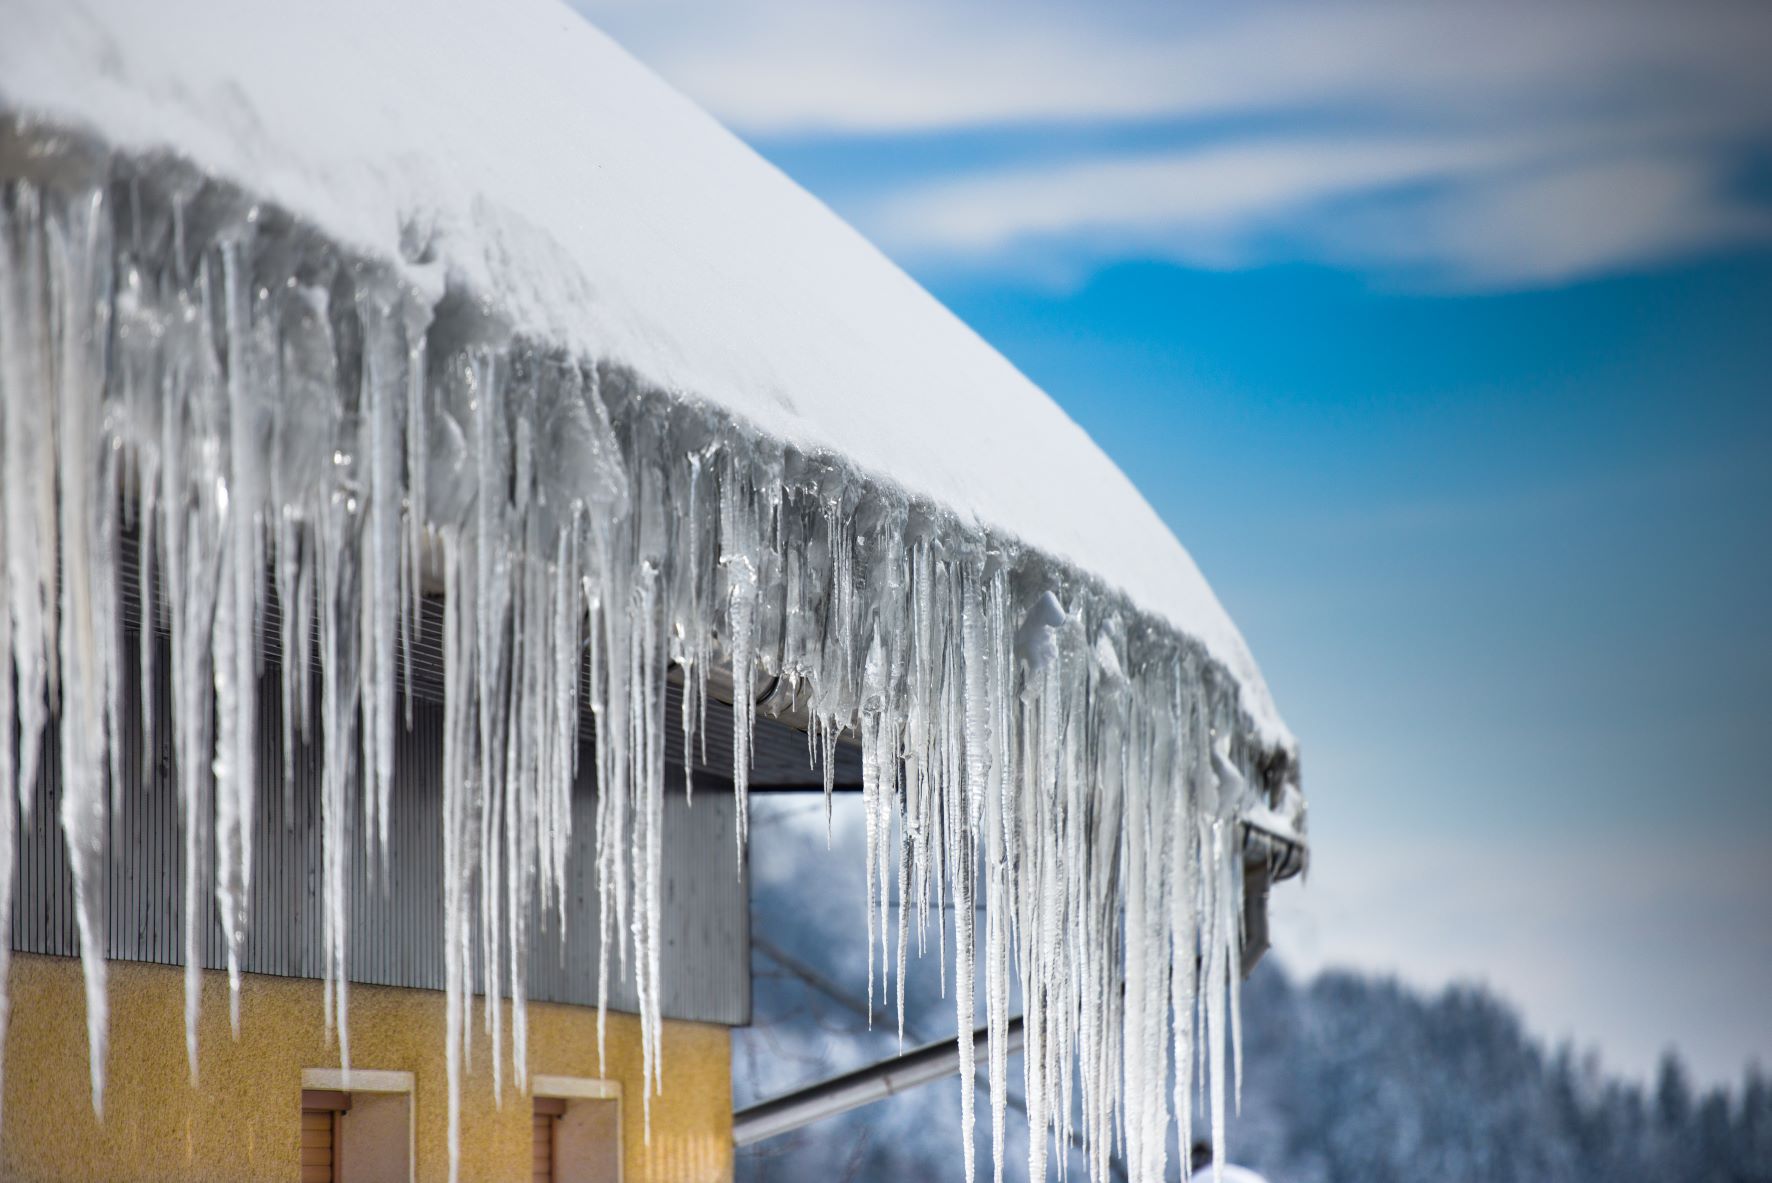 Prevent ice-dam damage to your home in freezing weather